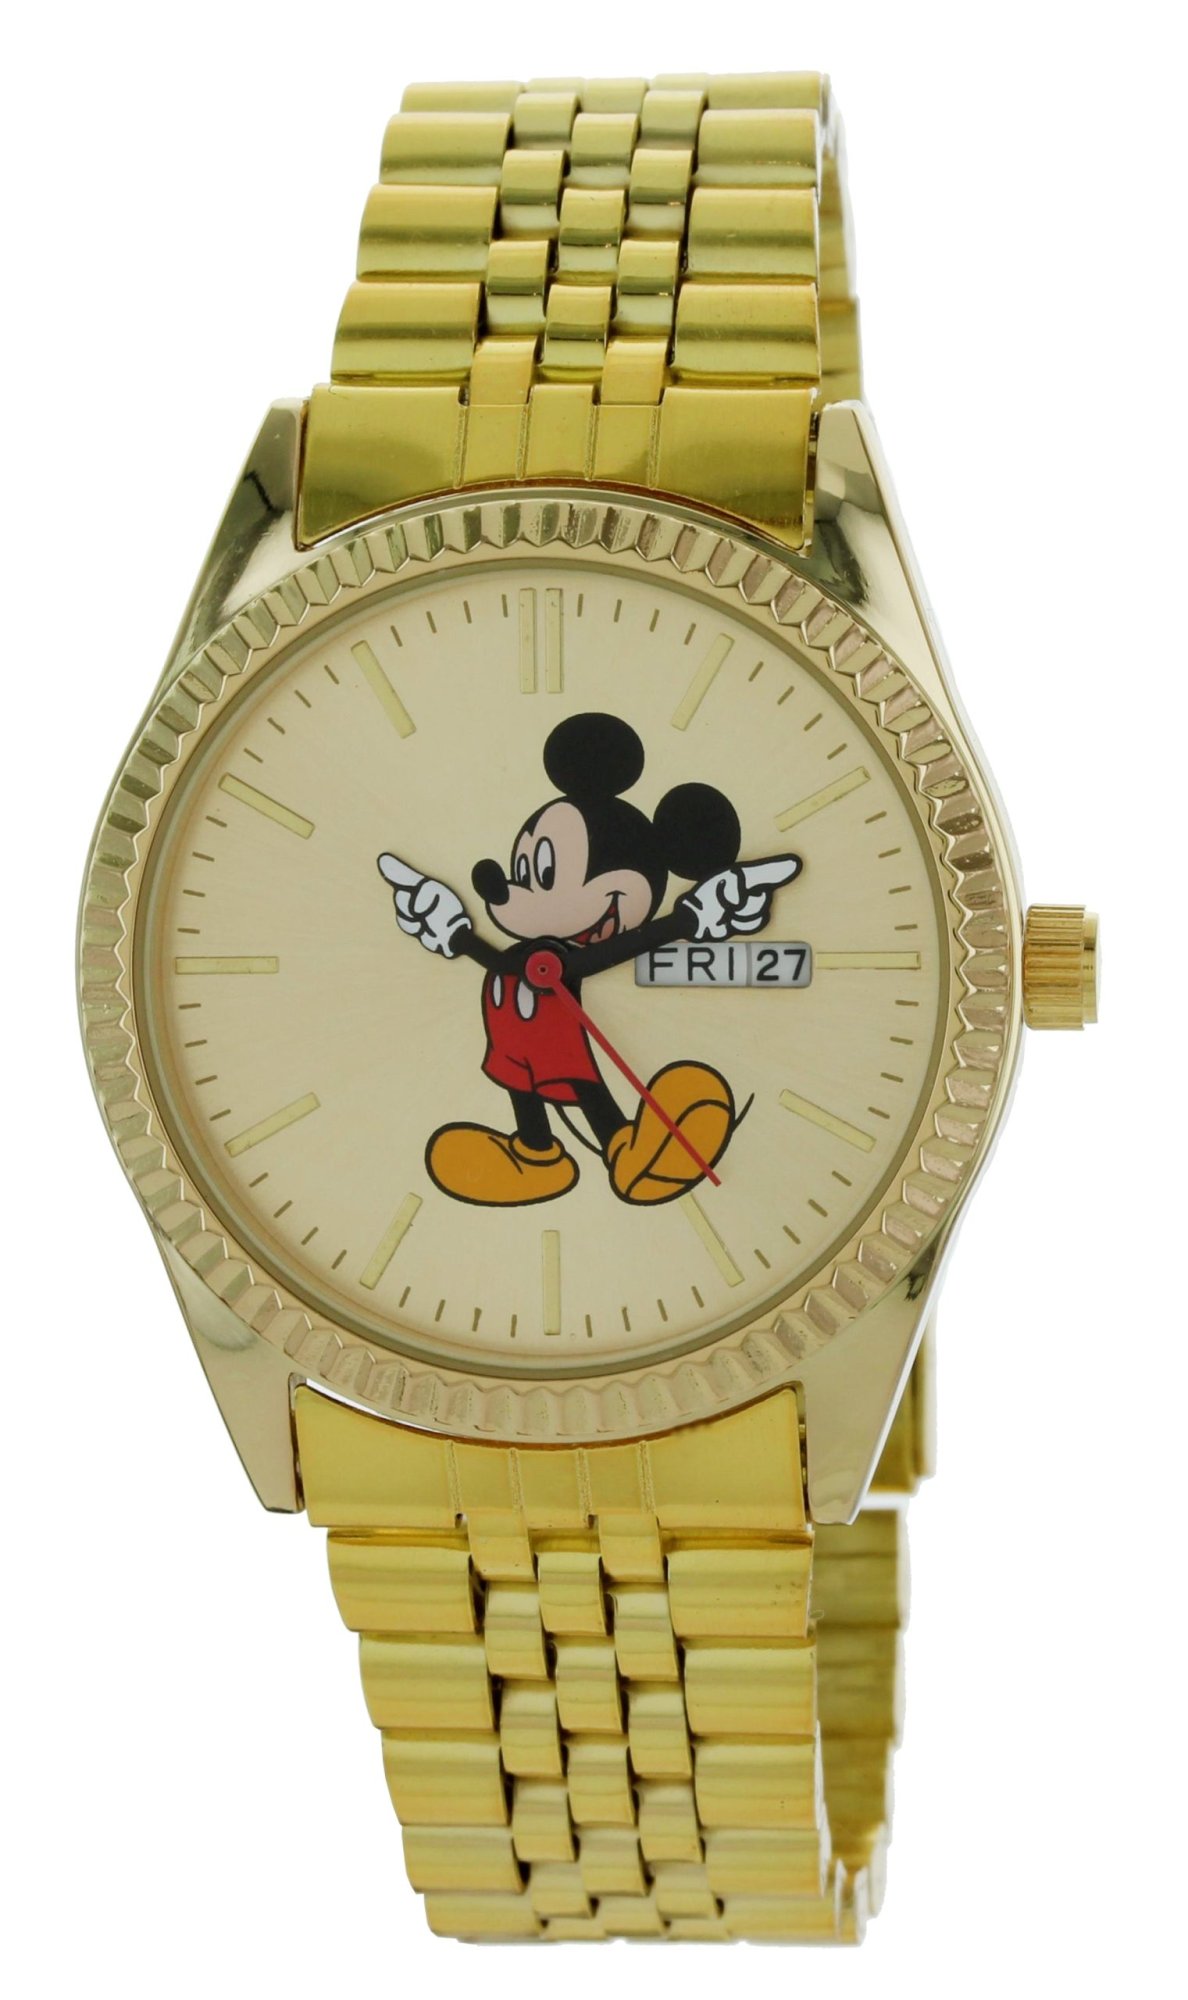 Model: Men's Mickey Mouse Watch in Yellow Gold with Day and Date